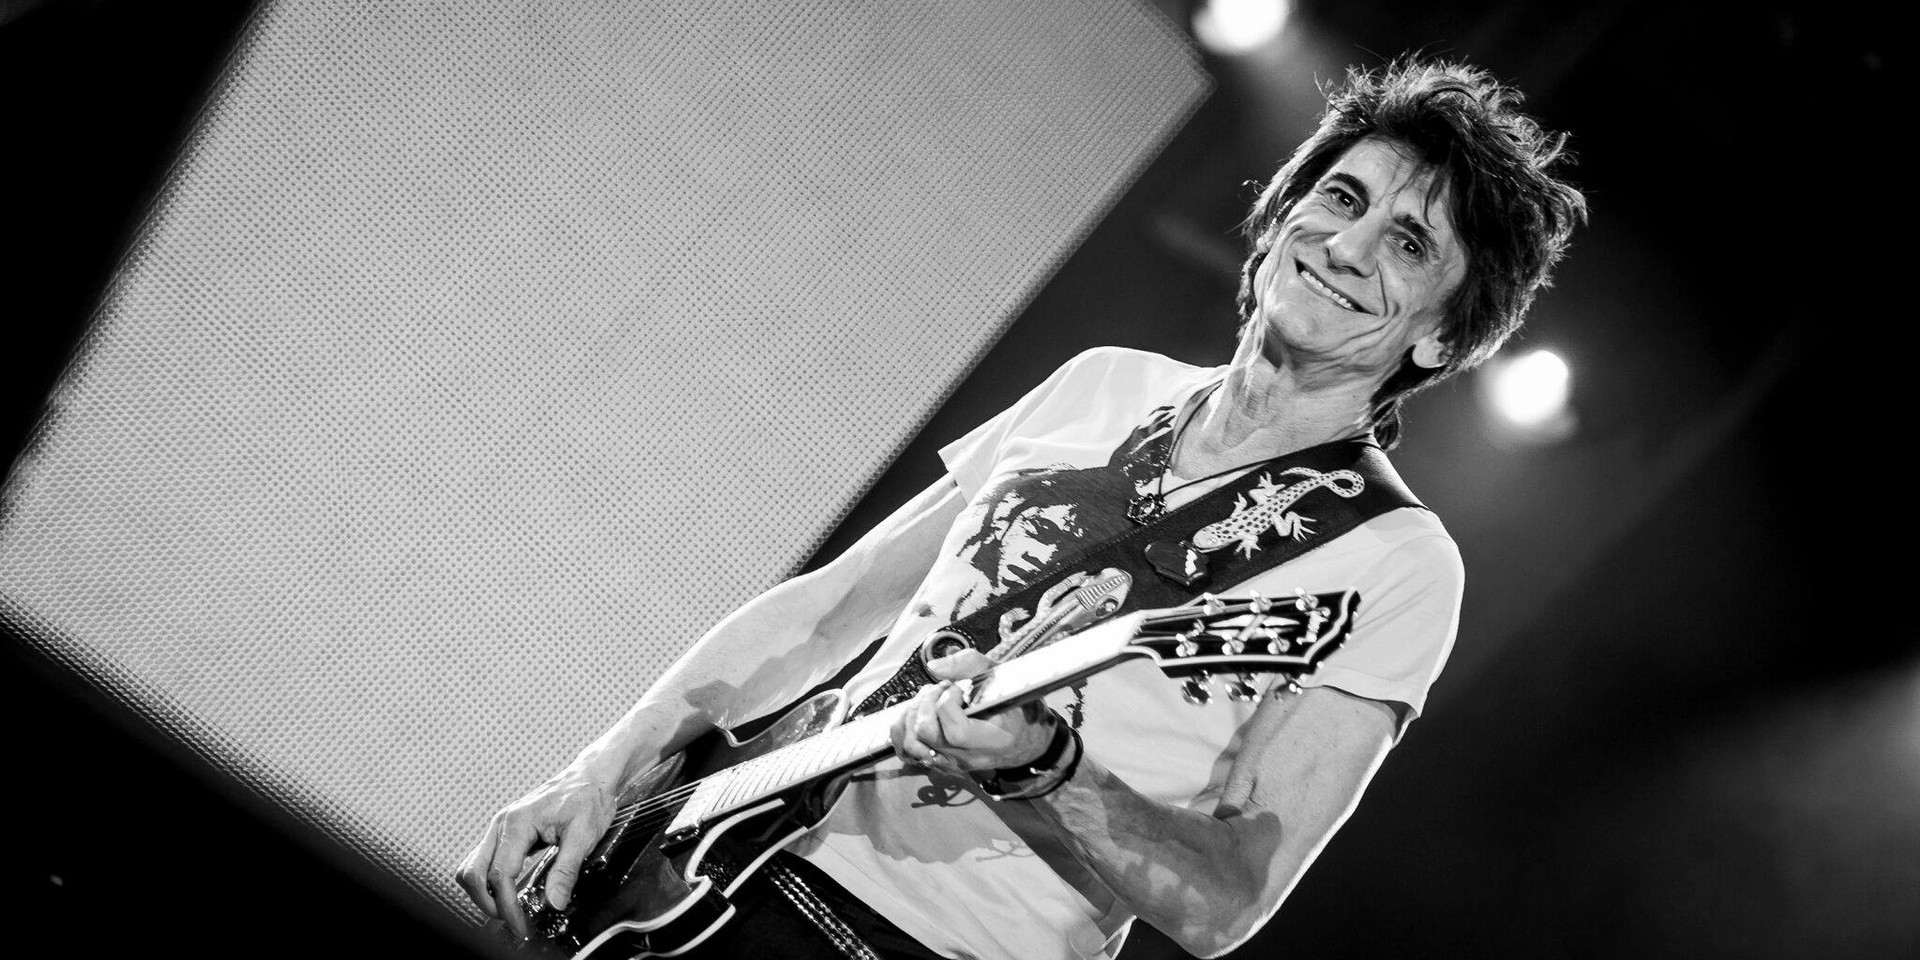 The Rolling Stones' guitarist Ronnie Wood beats cancer